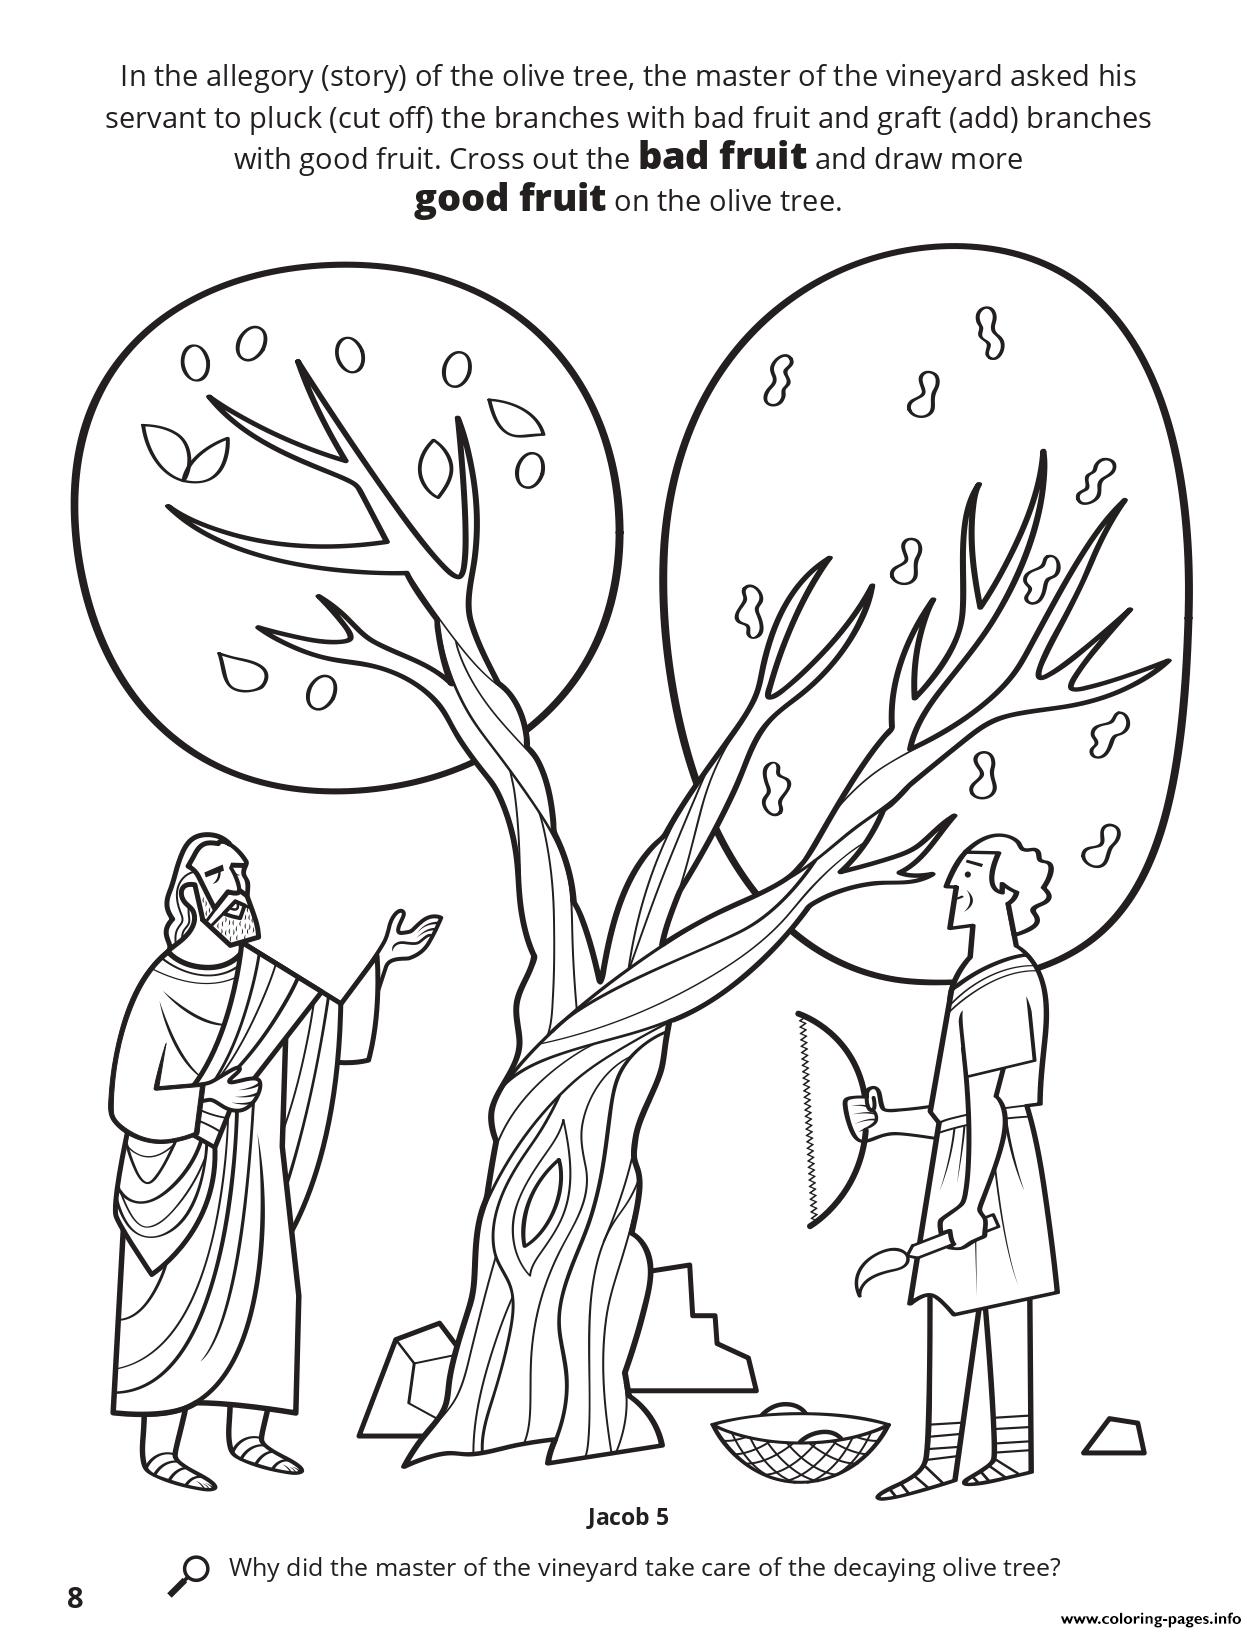 Cross Out The Bad Fruit And Draw More Good Fruit On The Olive Tree coloring